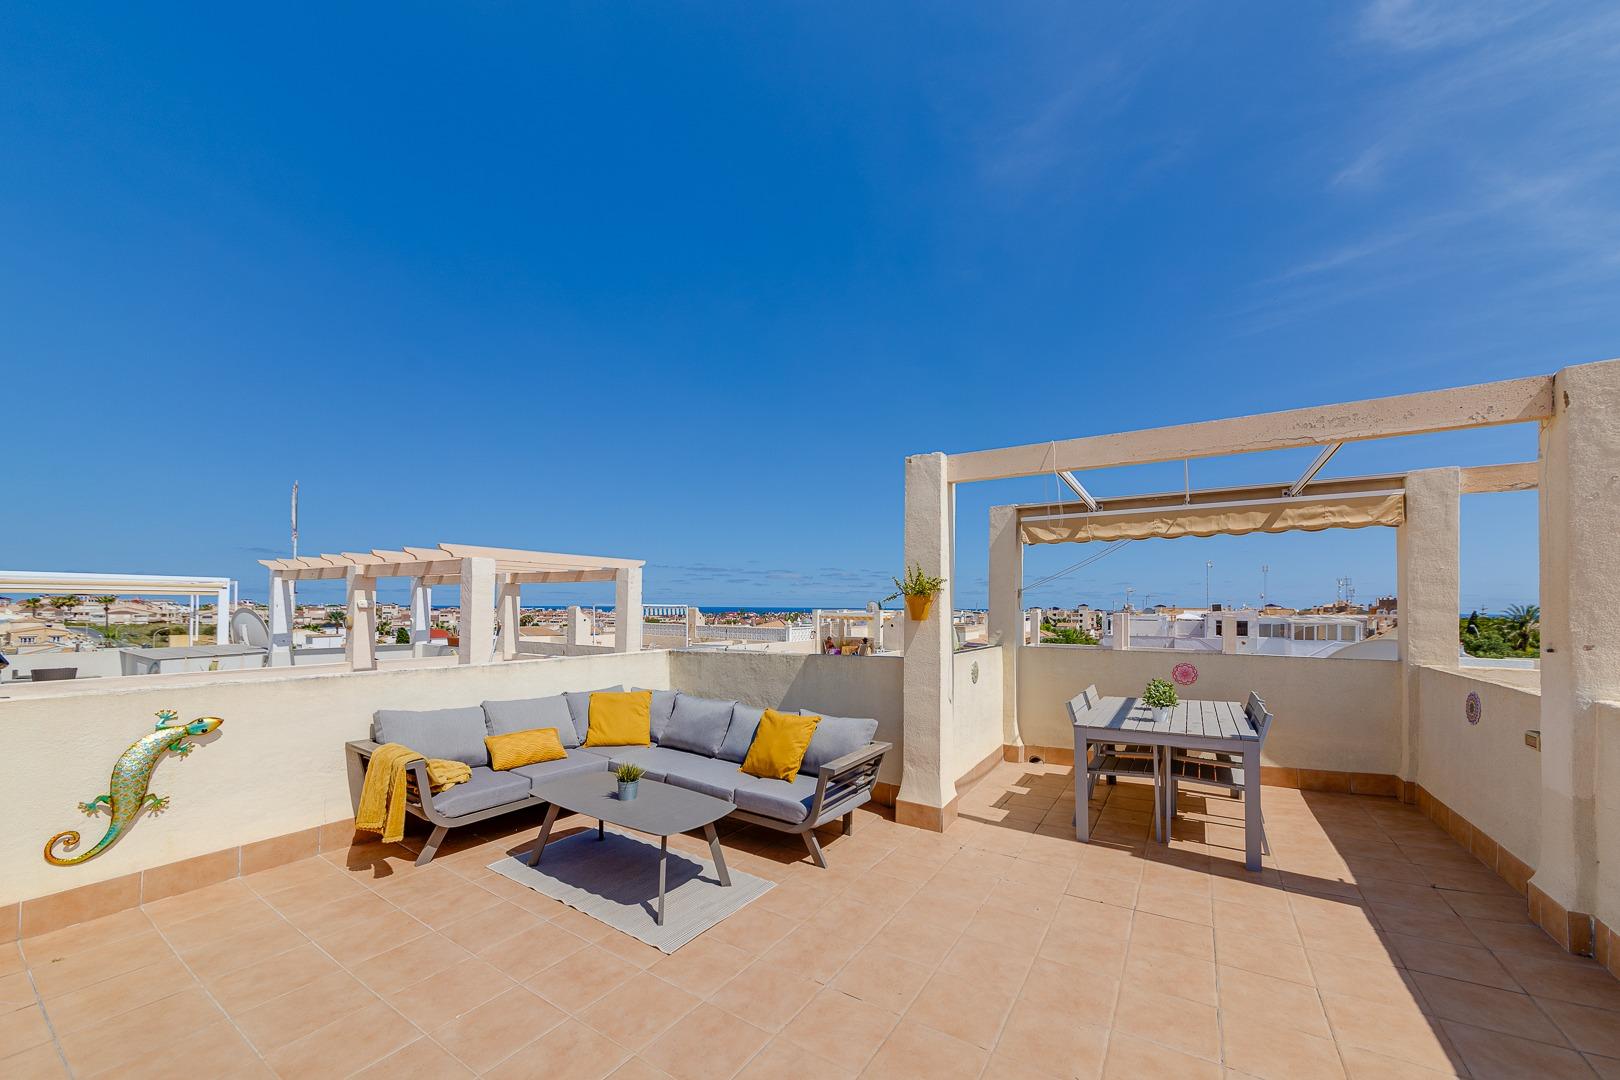 Renovated upstairs apartment for sale with a beautiful roof terrace in the popular area of La Florida, Orihuela Costa.